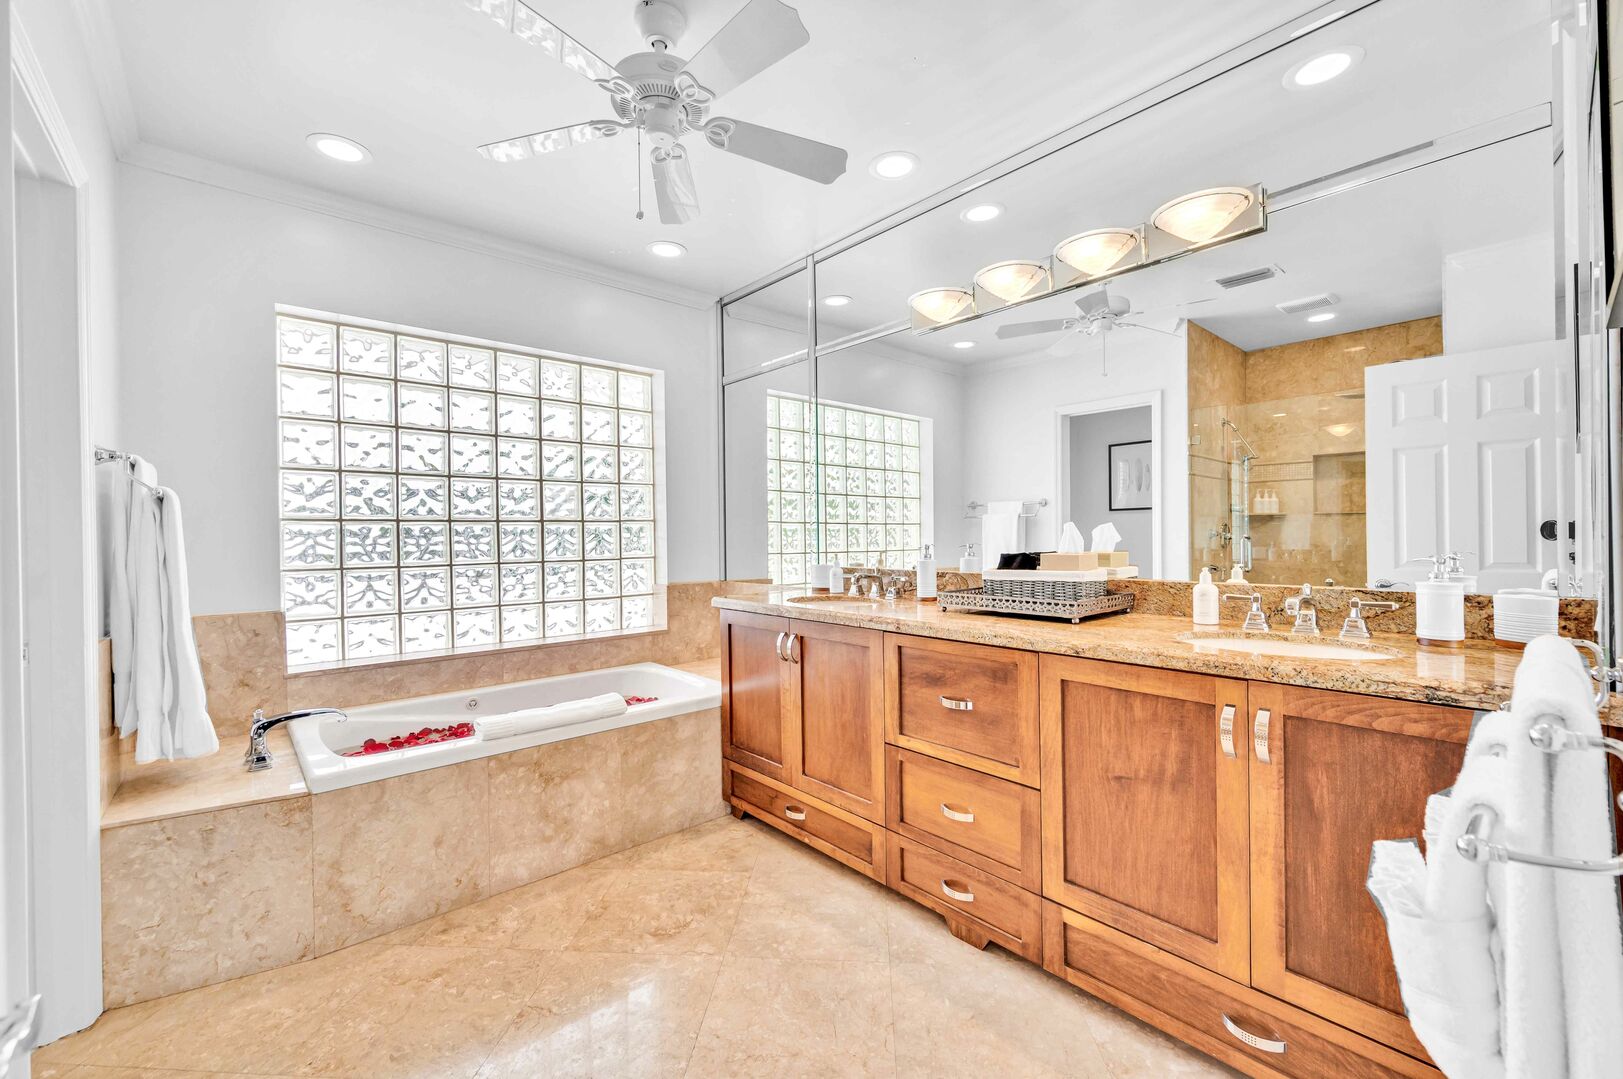 The luxurious master bathroom features a double vanity, large soaking tub and separate shower.